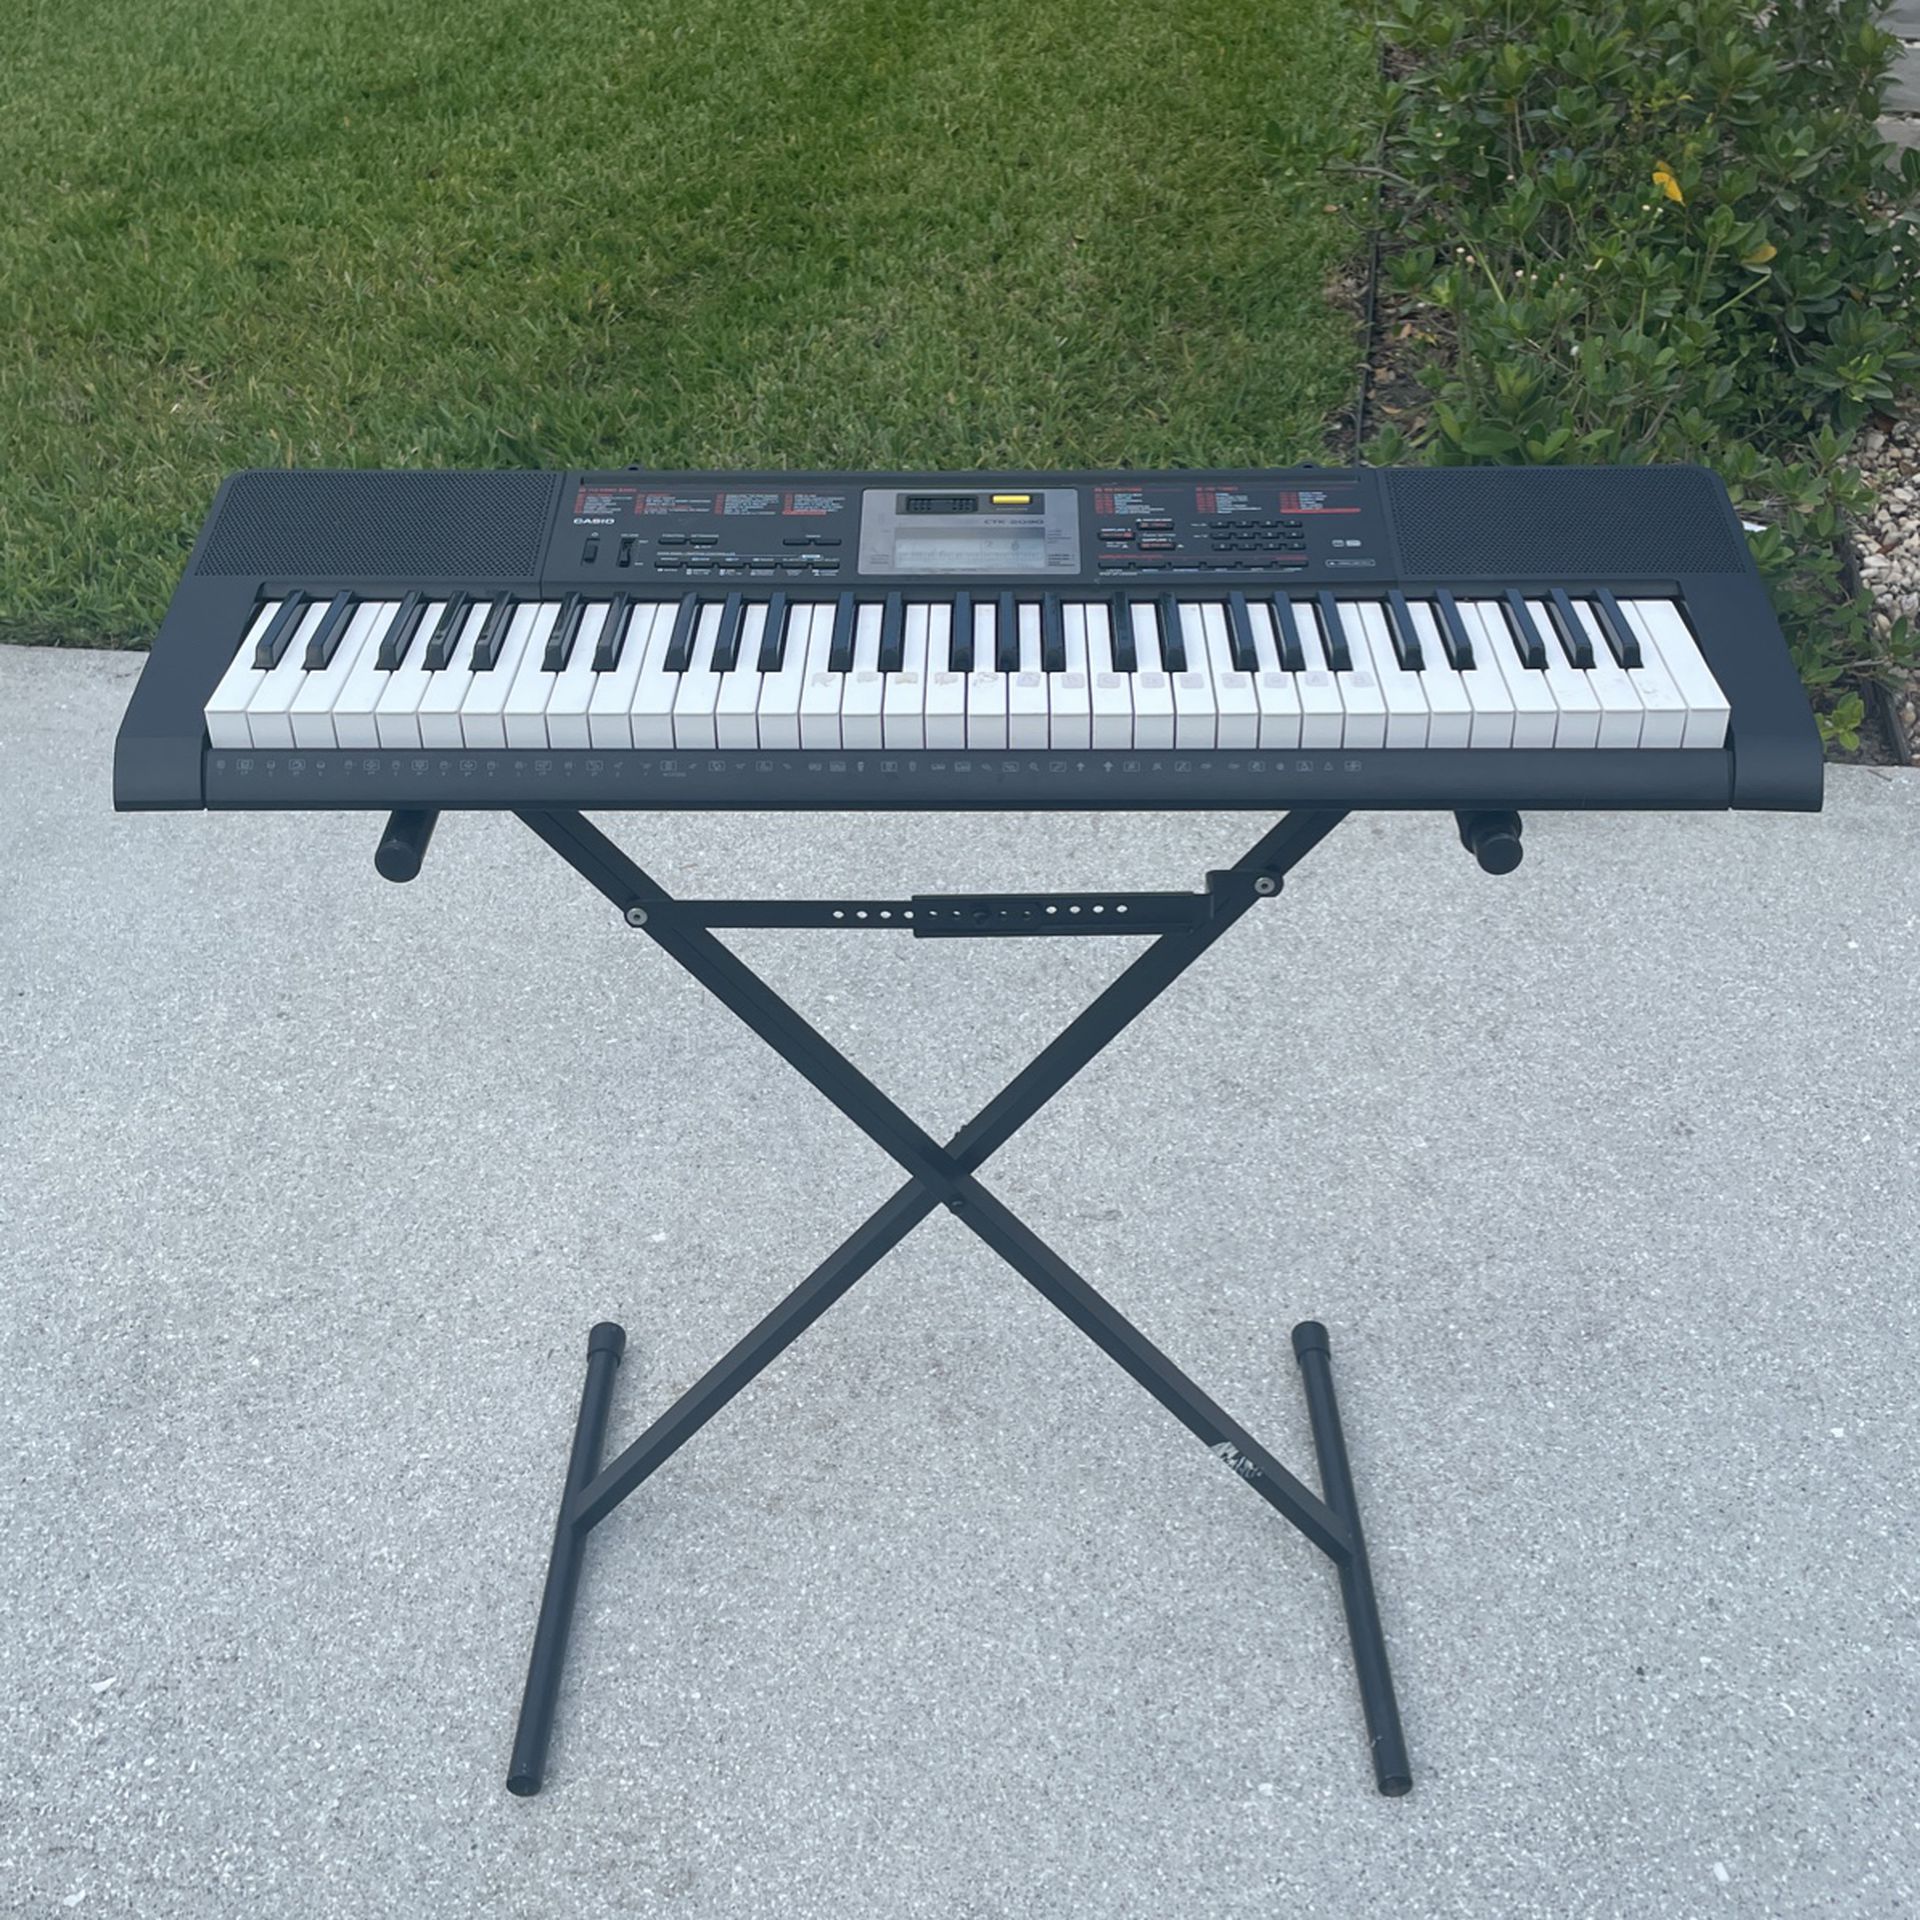 Casio Keyboard and Portable Stand